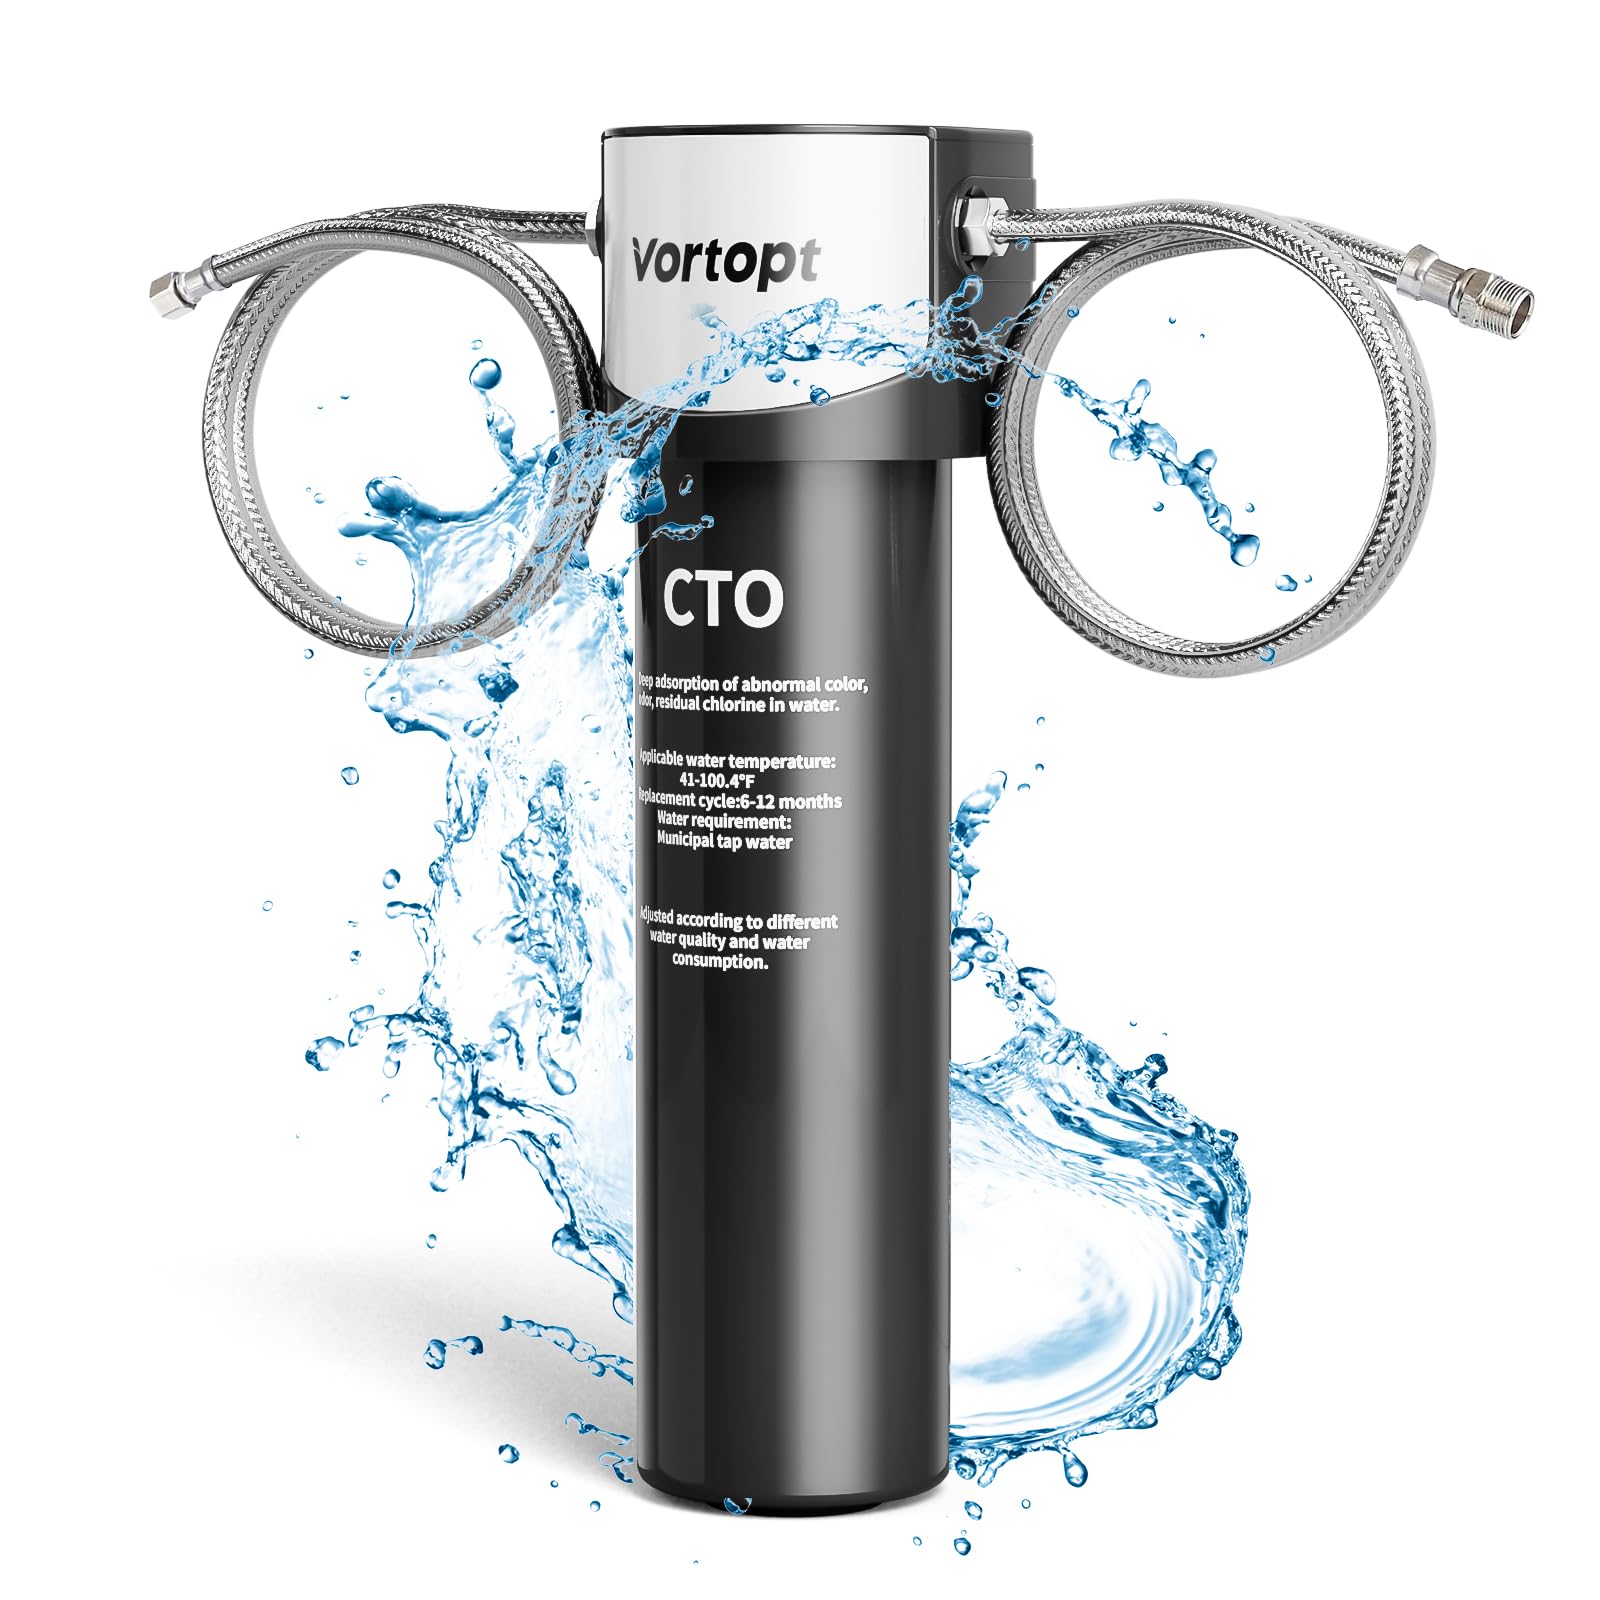 Water filter systems for your tap